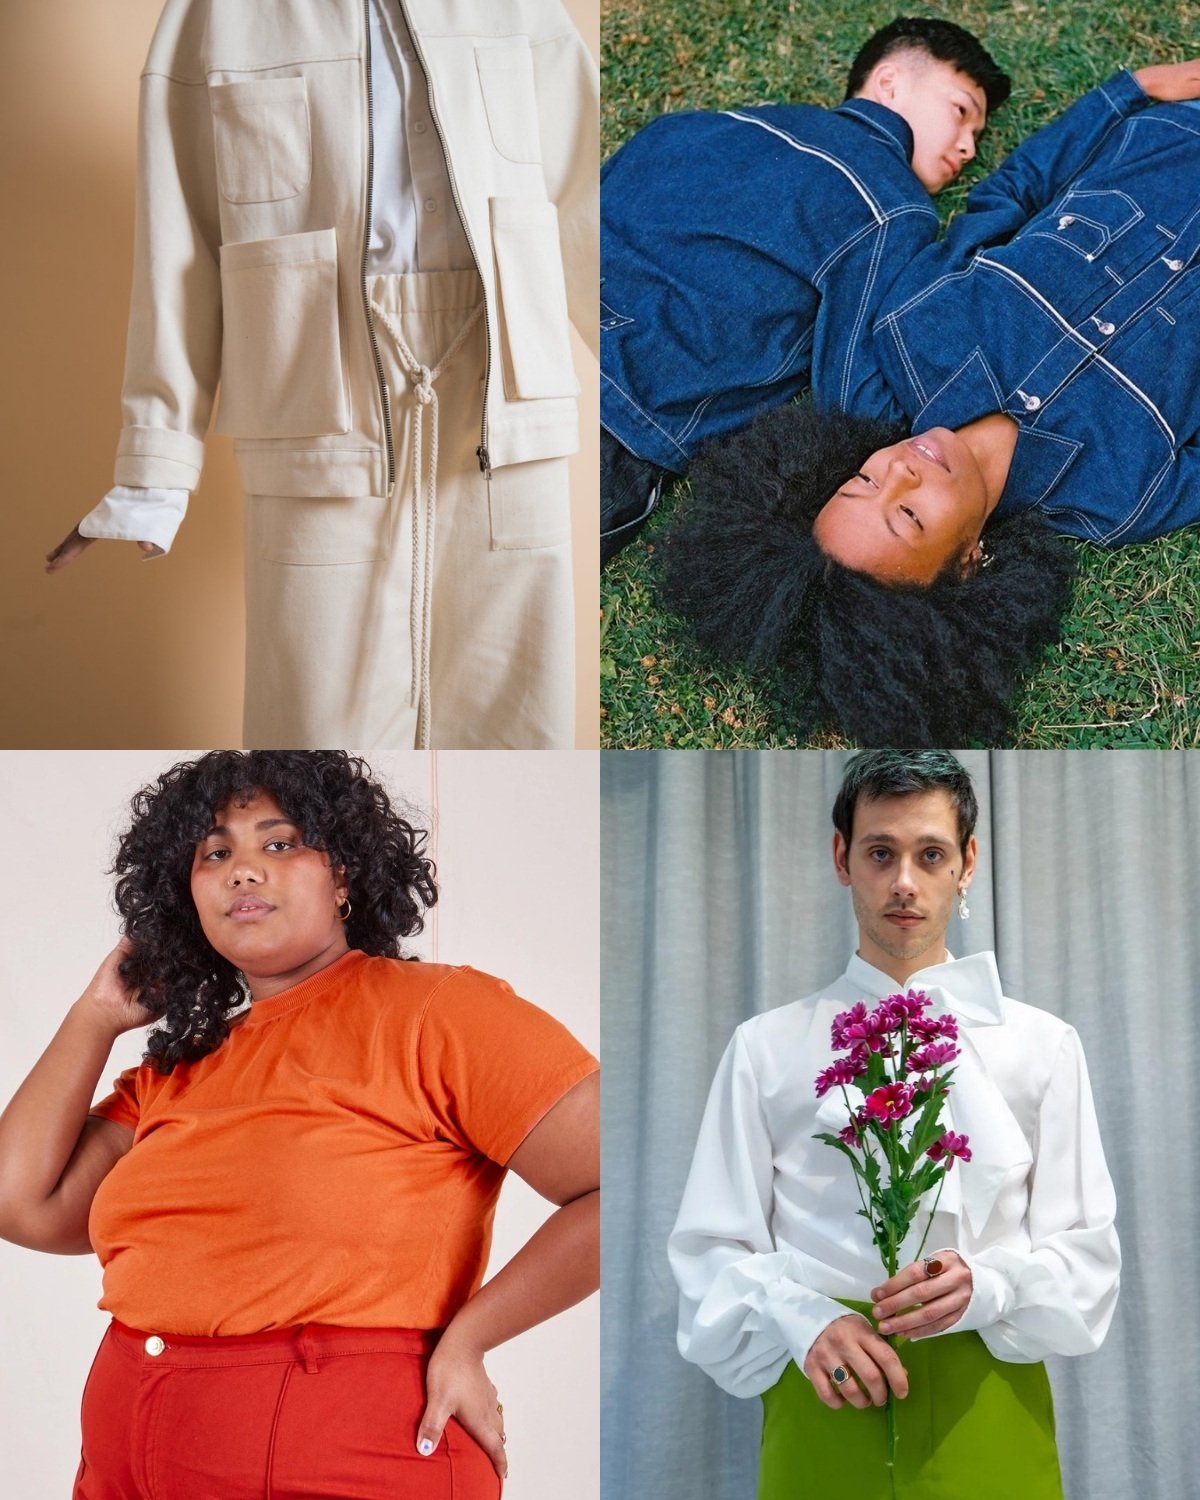 10 Genderless Slow Fashion Brands With Inclusive Clothing